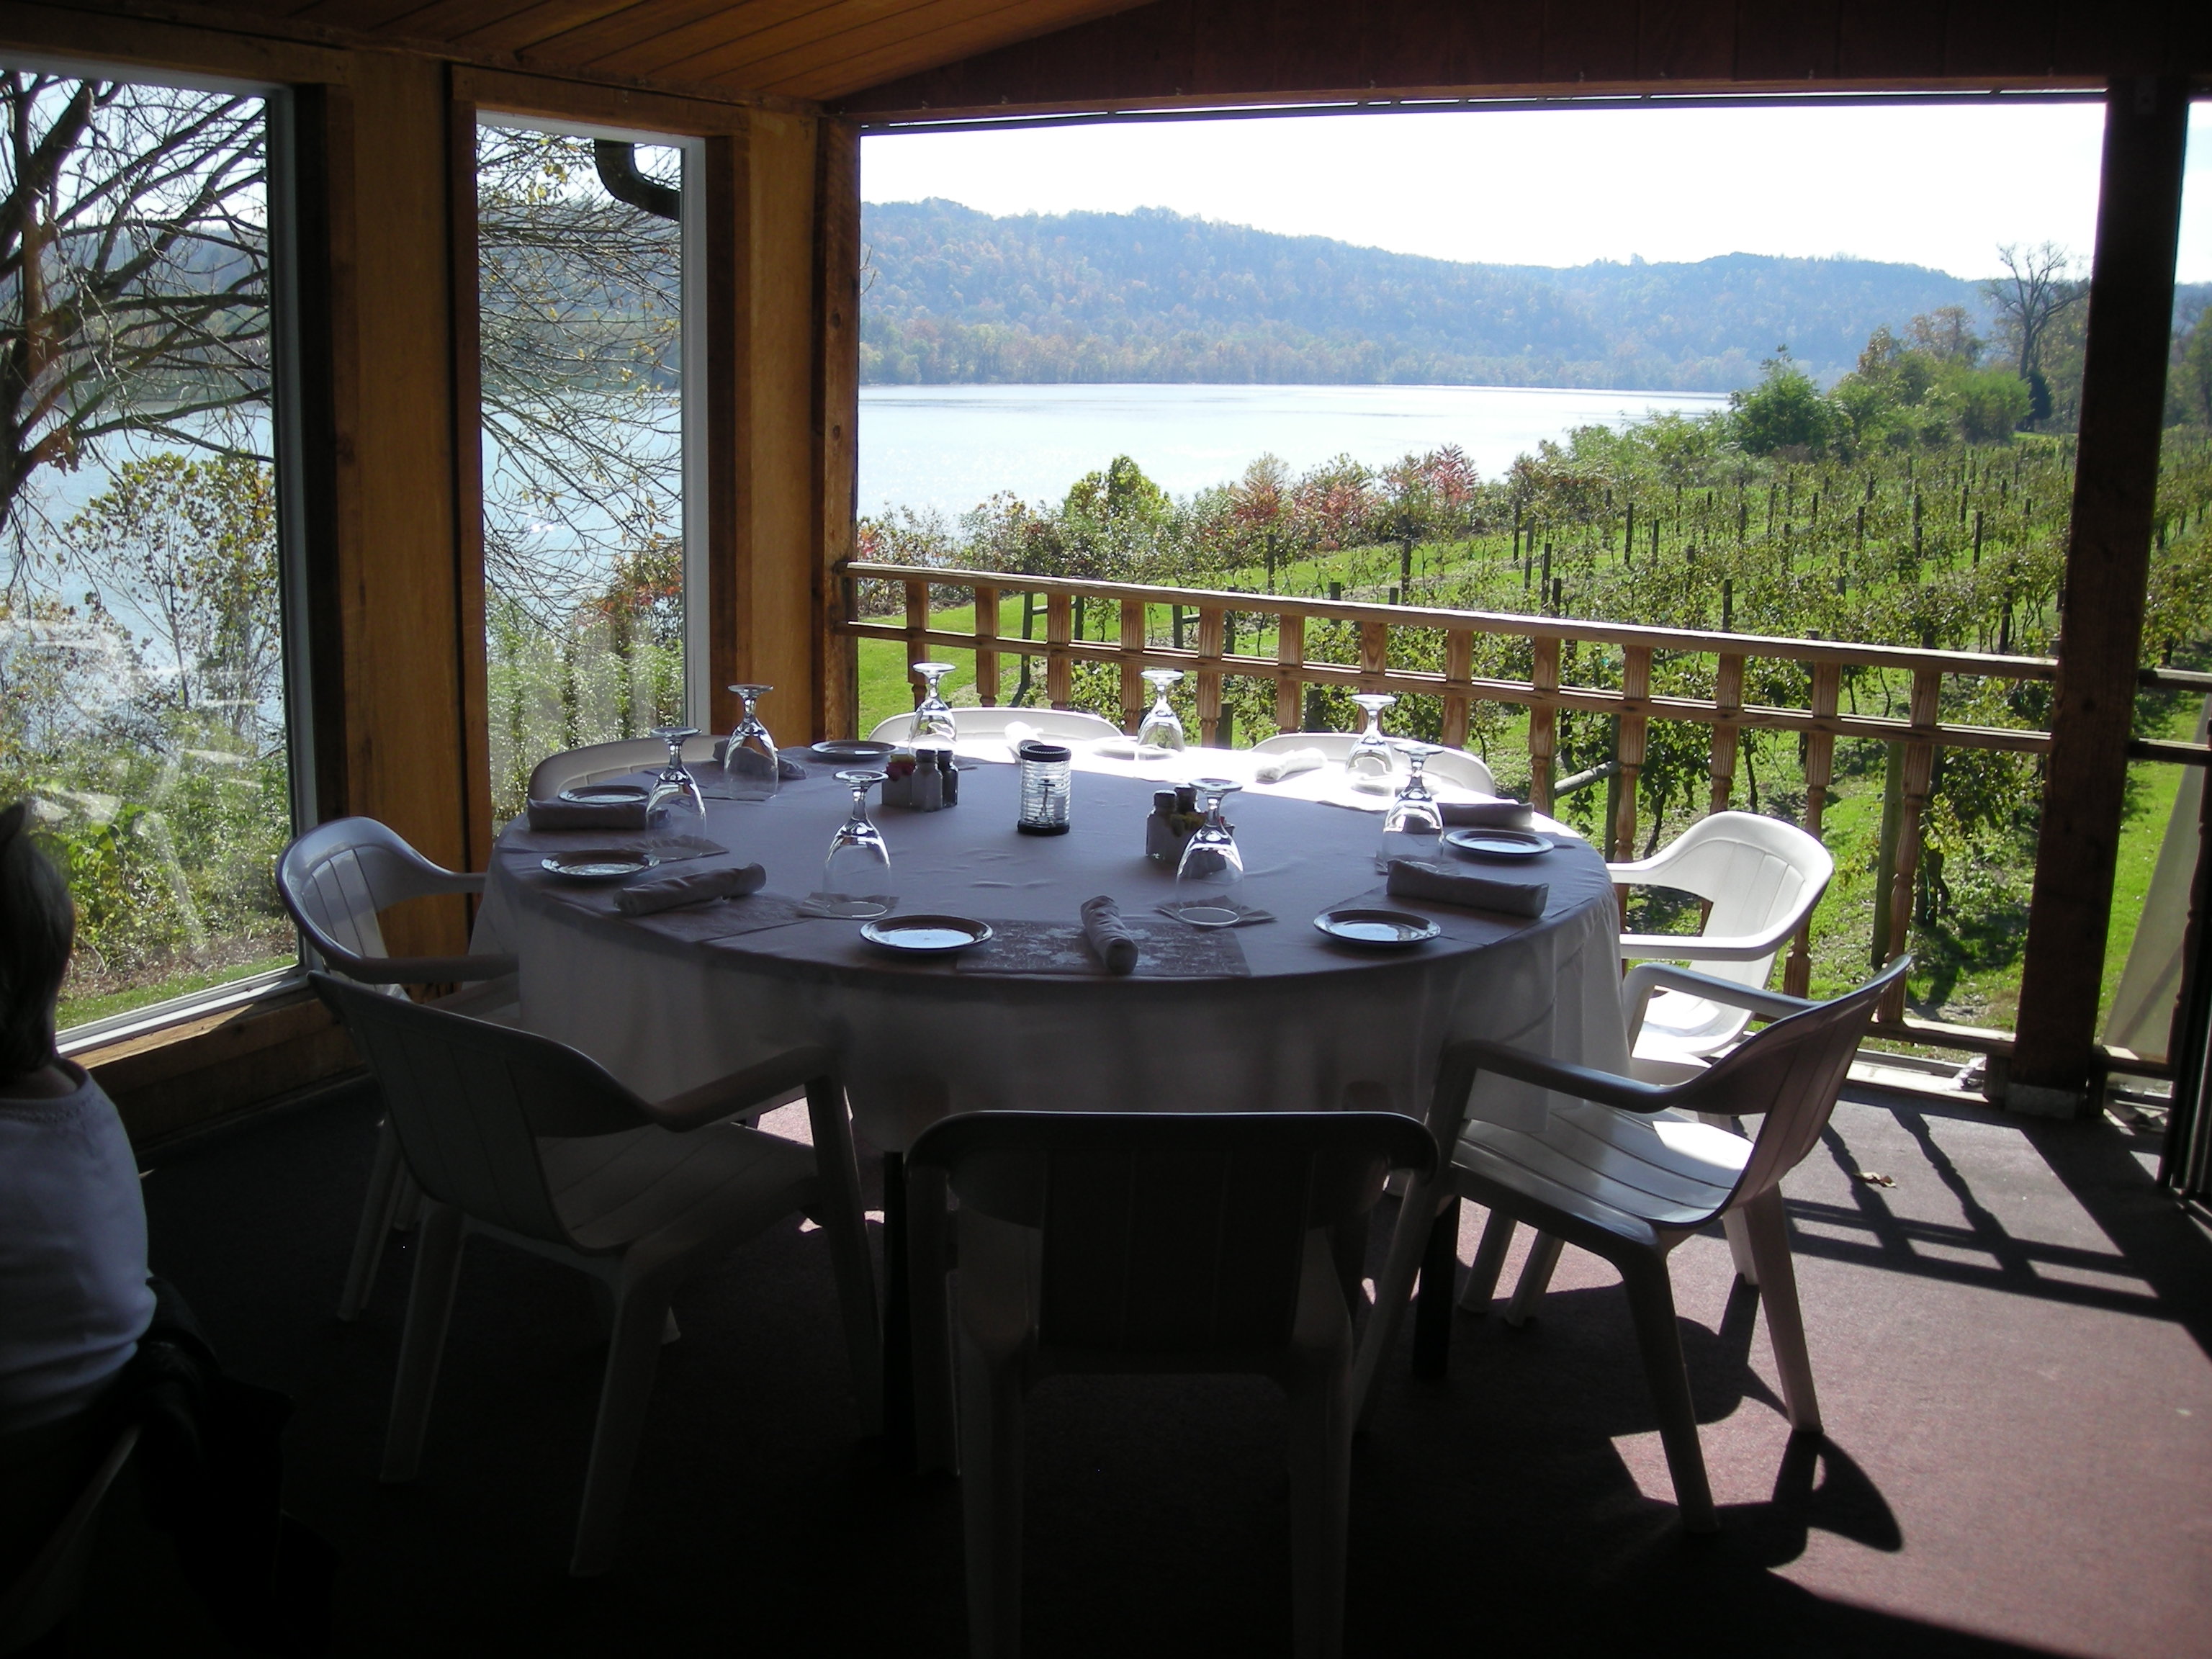 Moyer Winery and Restaurant Coupons near me in Manchester | 8coupons